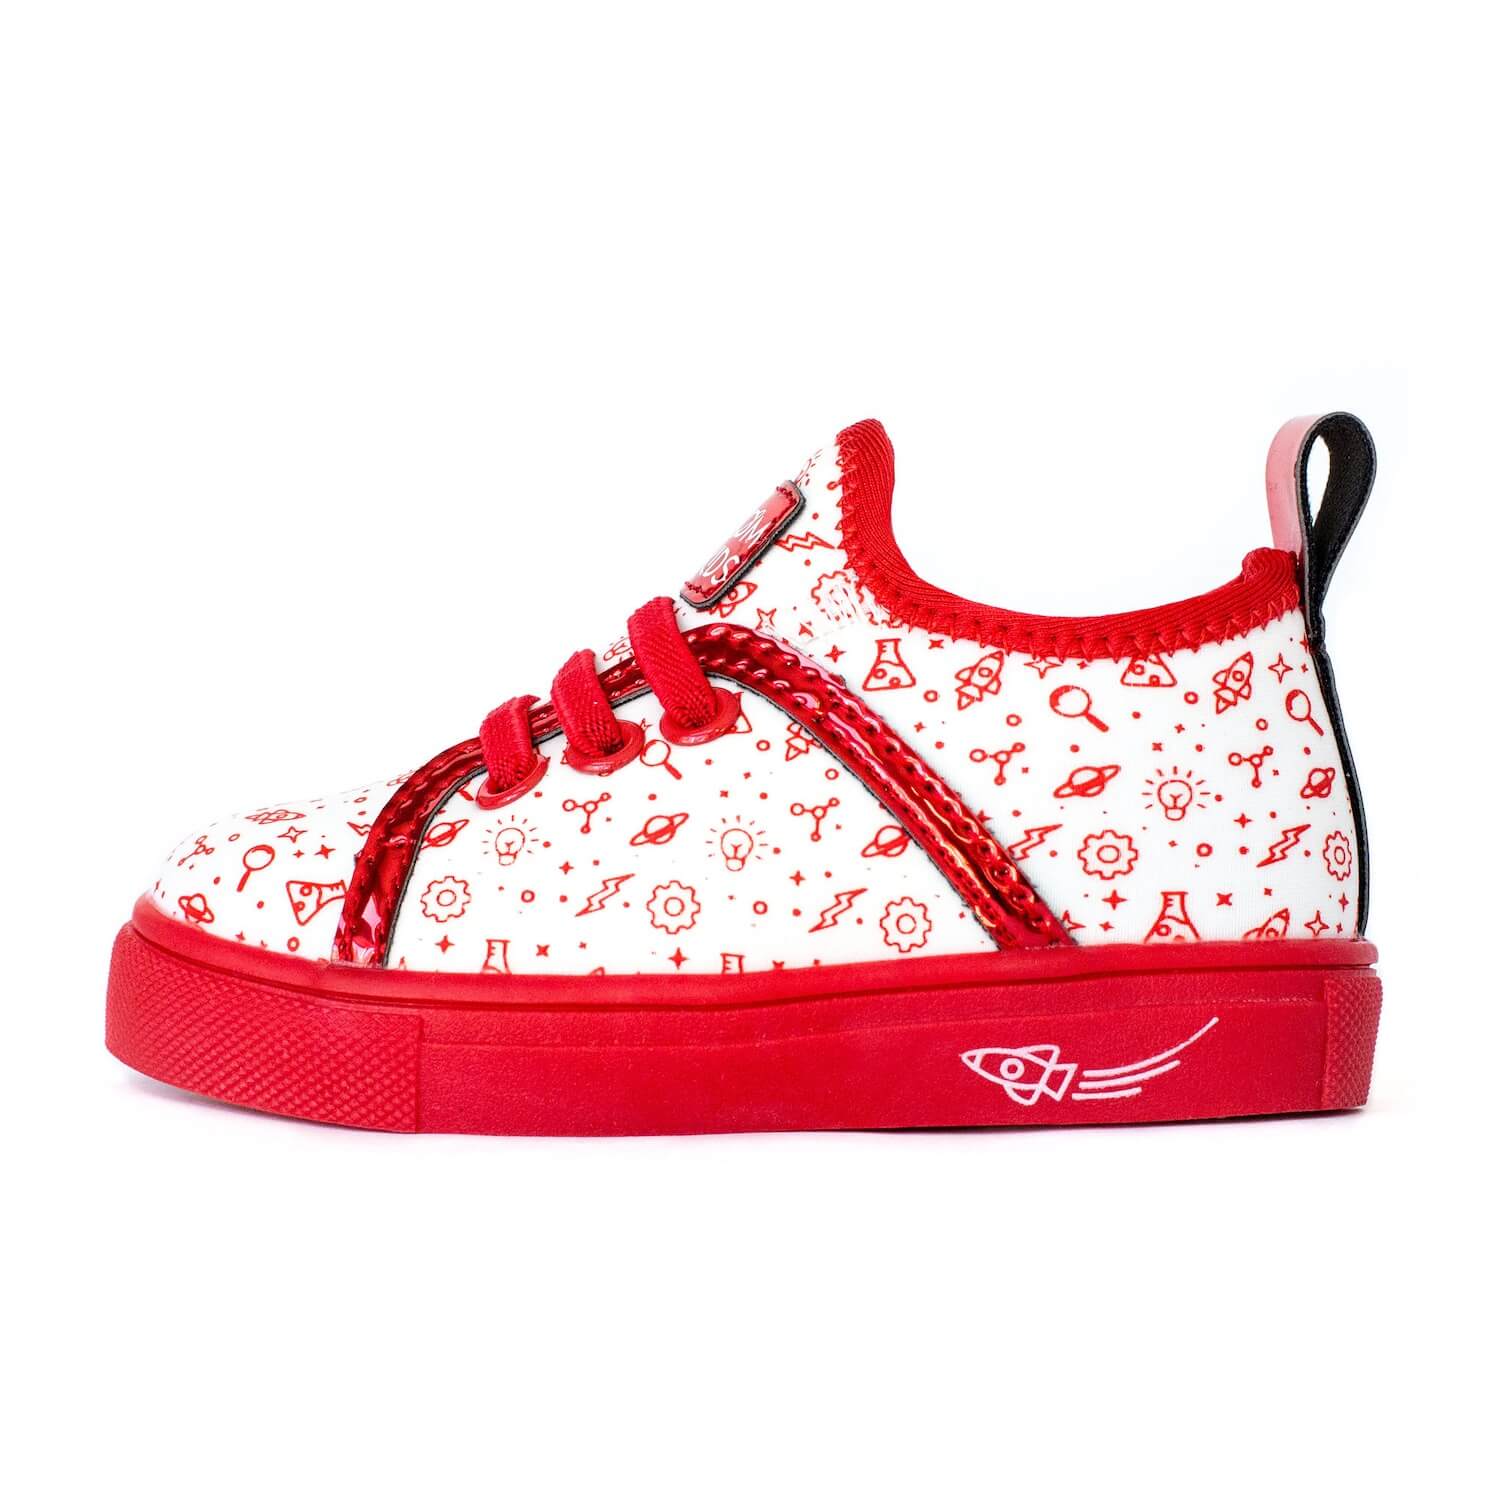 Toddler Girl Tennis Shoes -Red and white